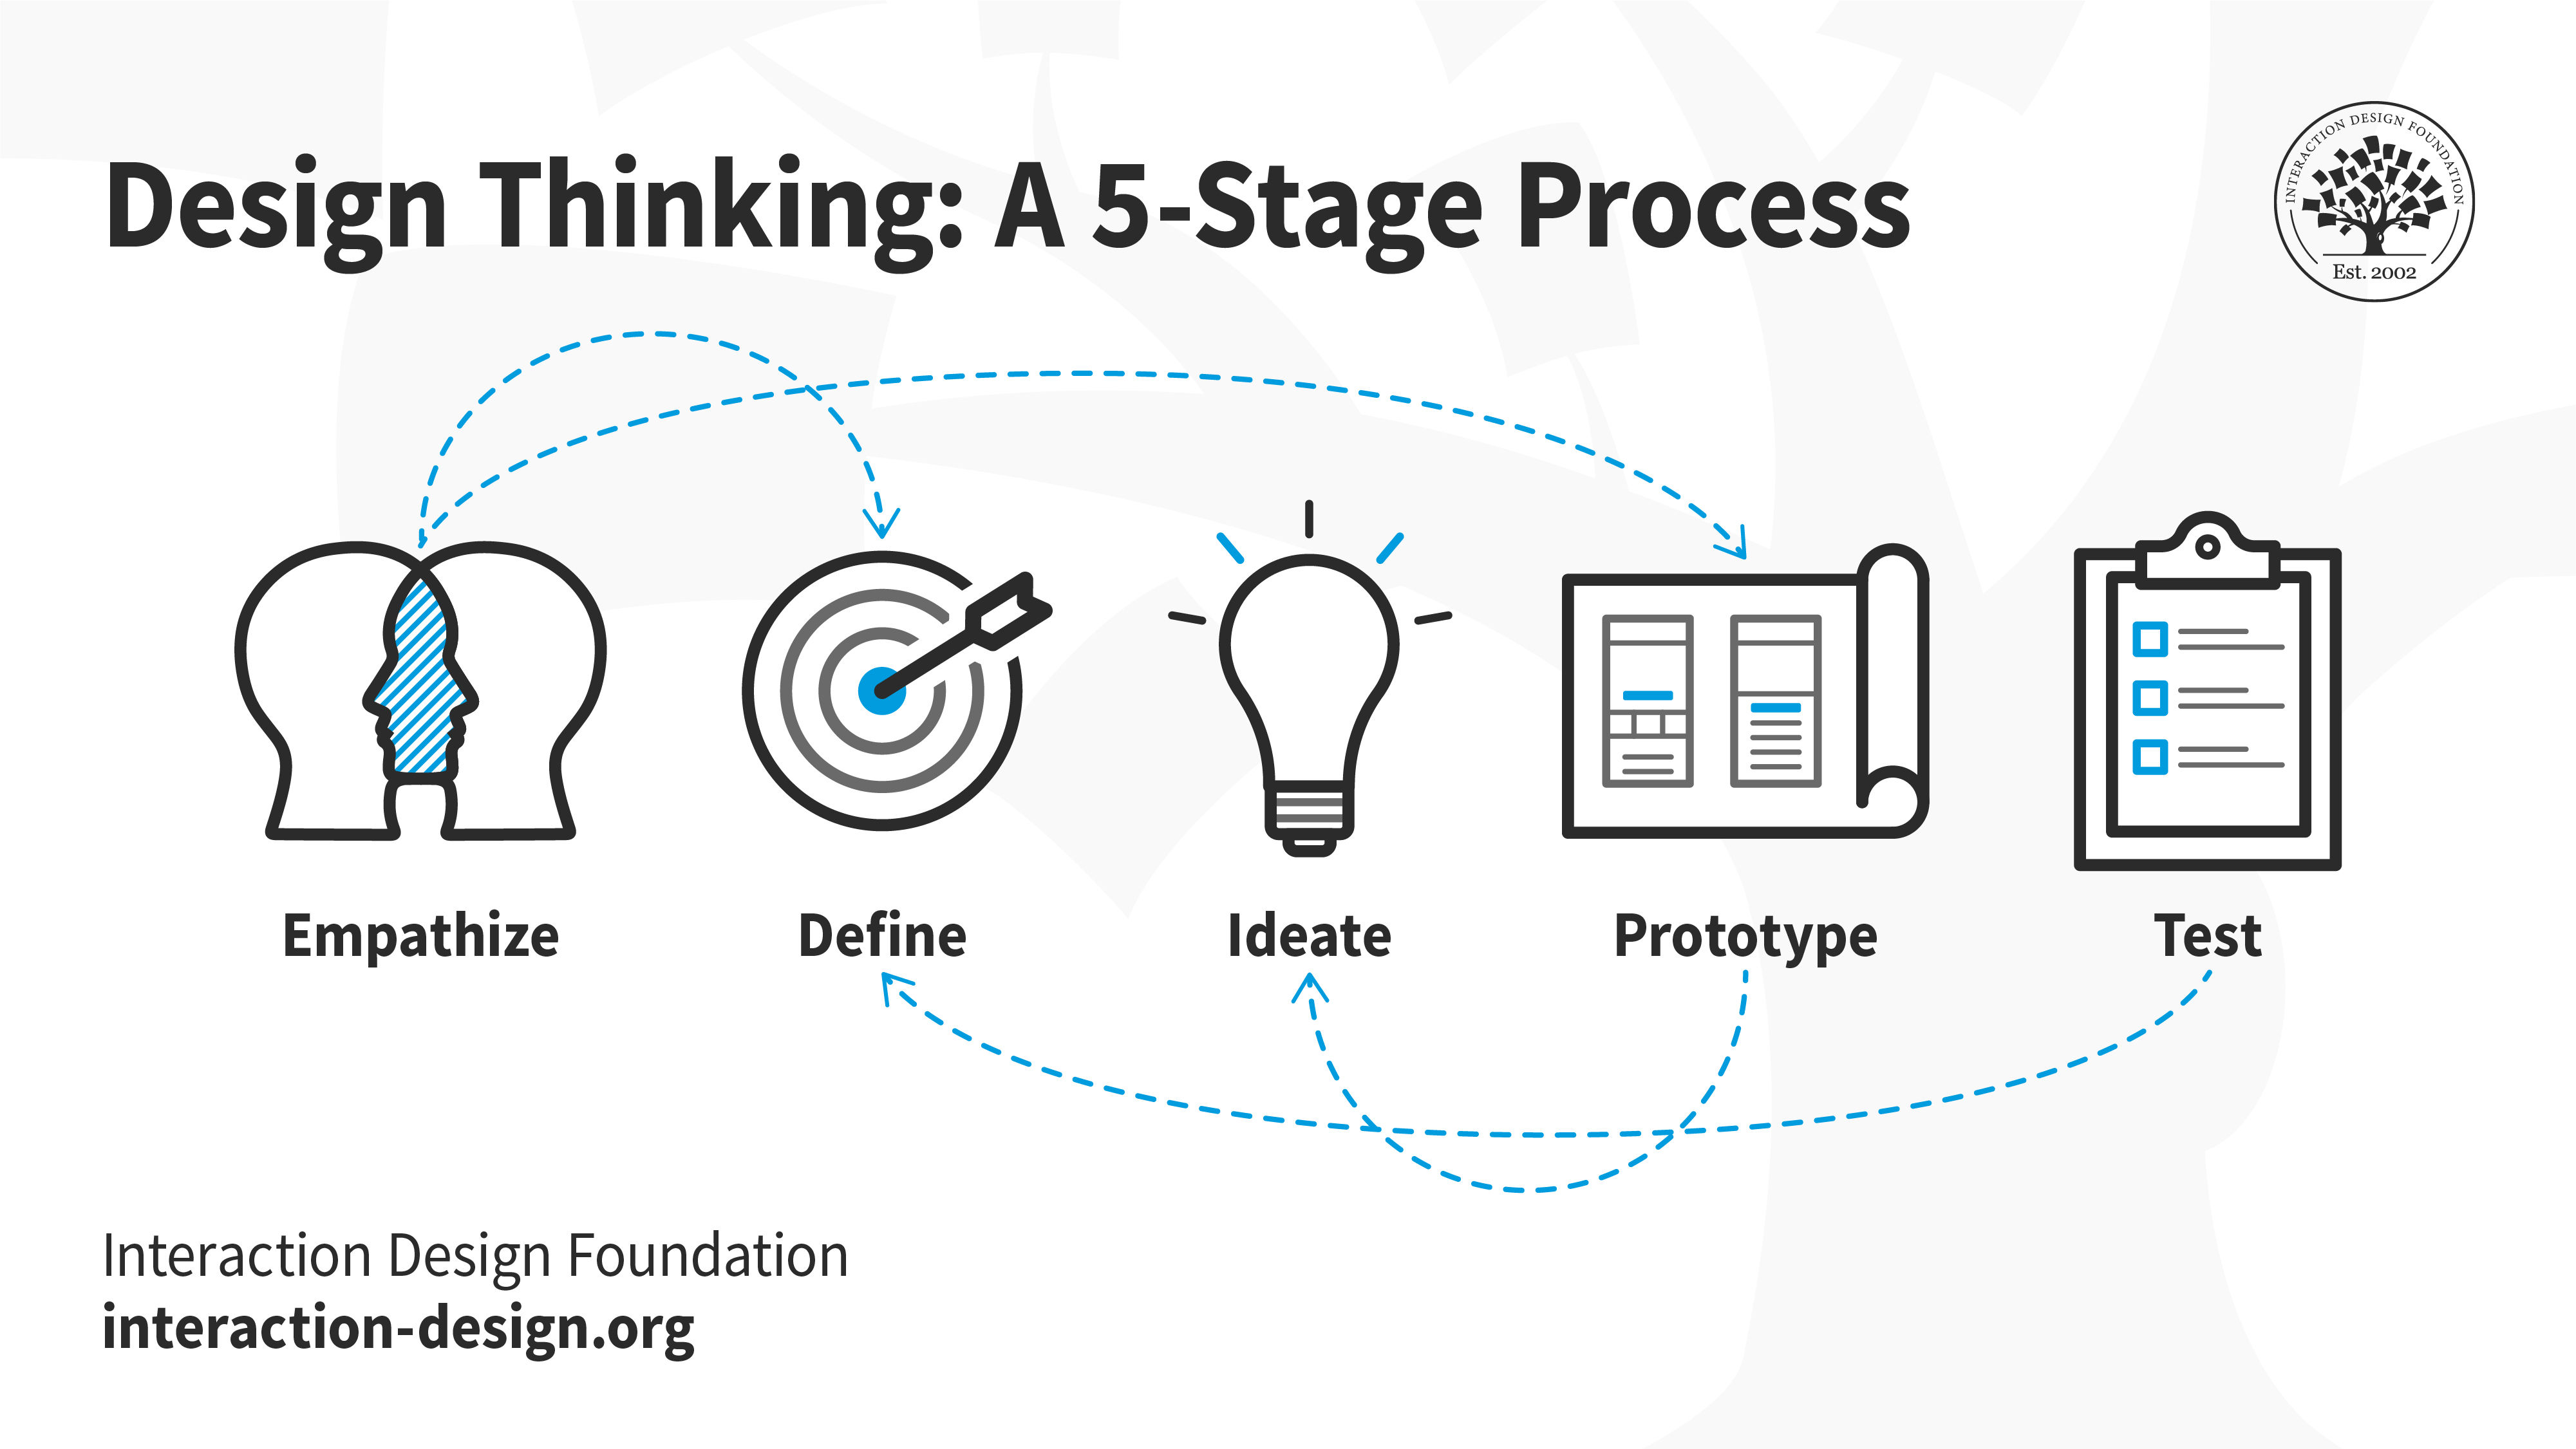 What Is Design Thinking? | Ixdf